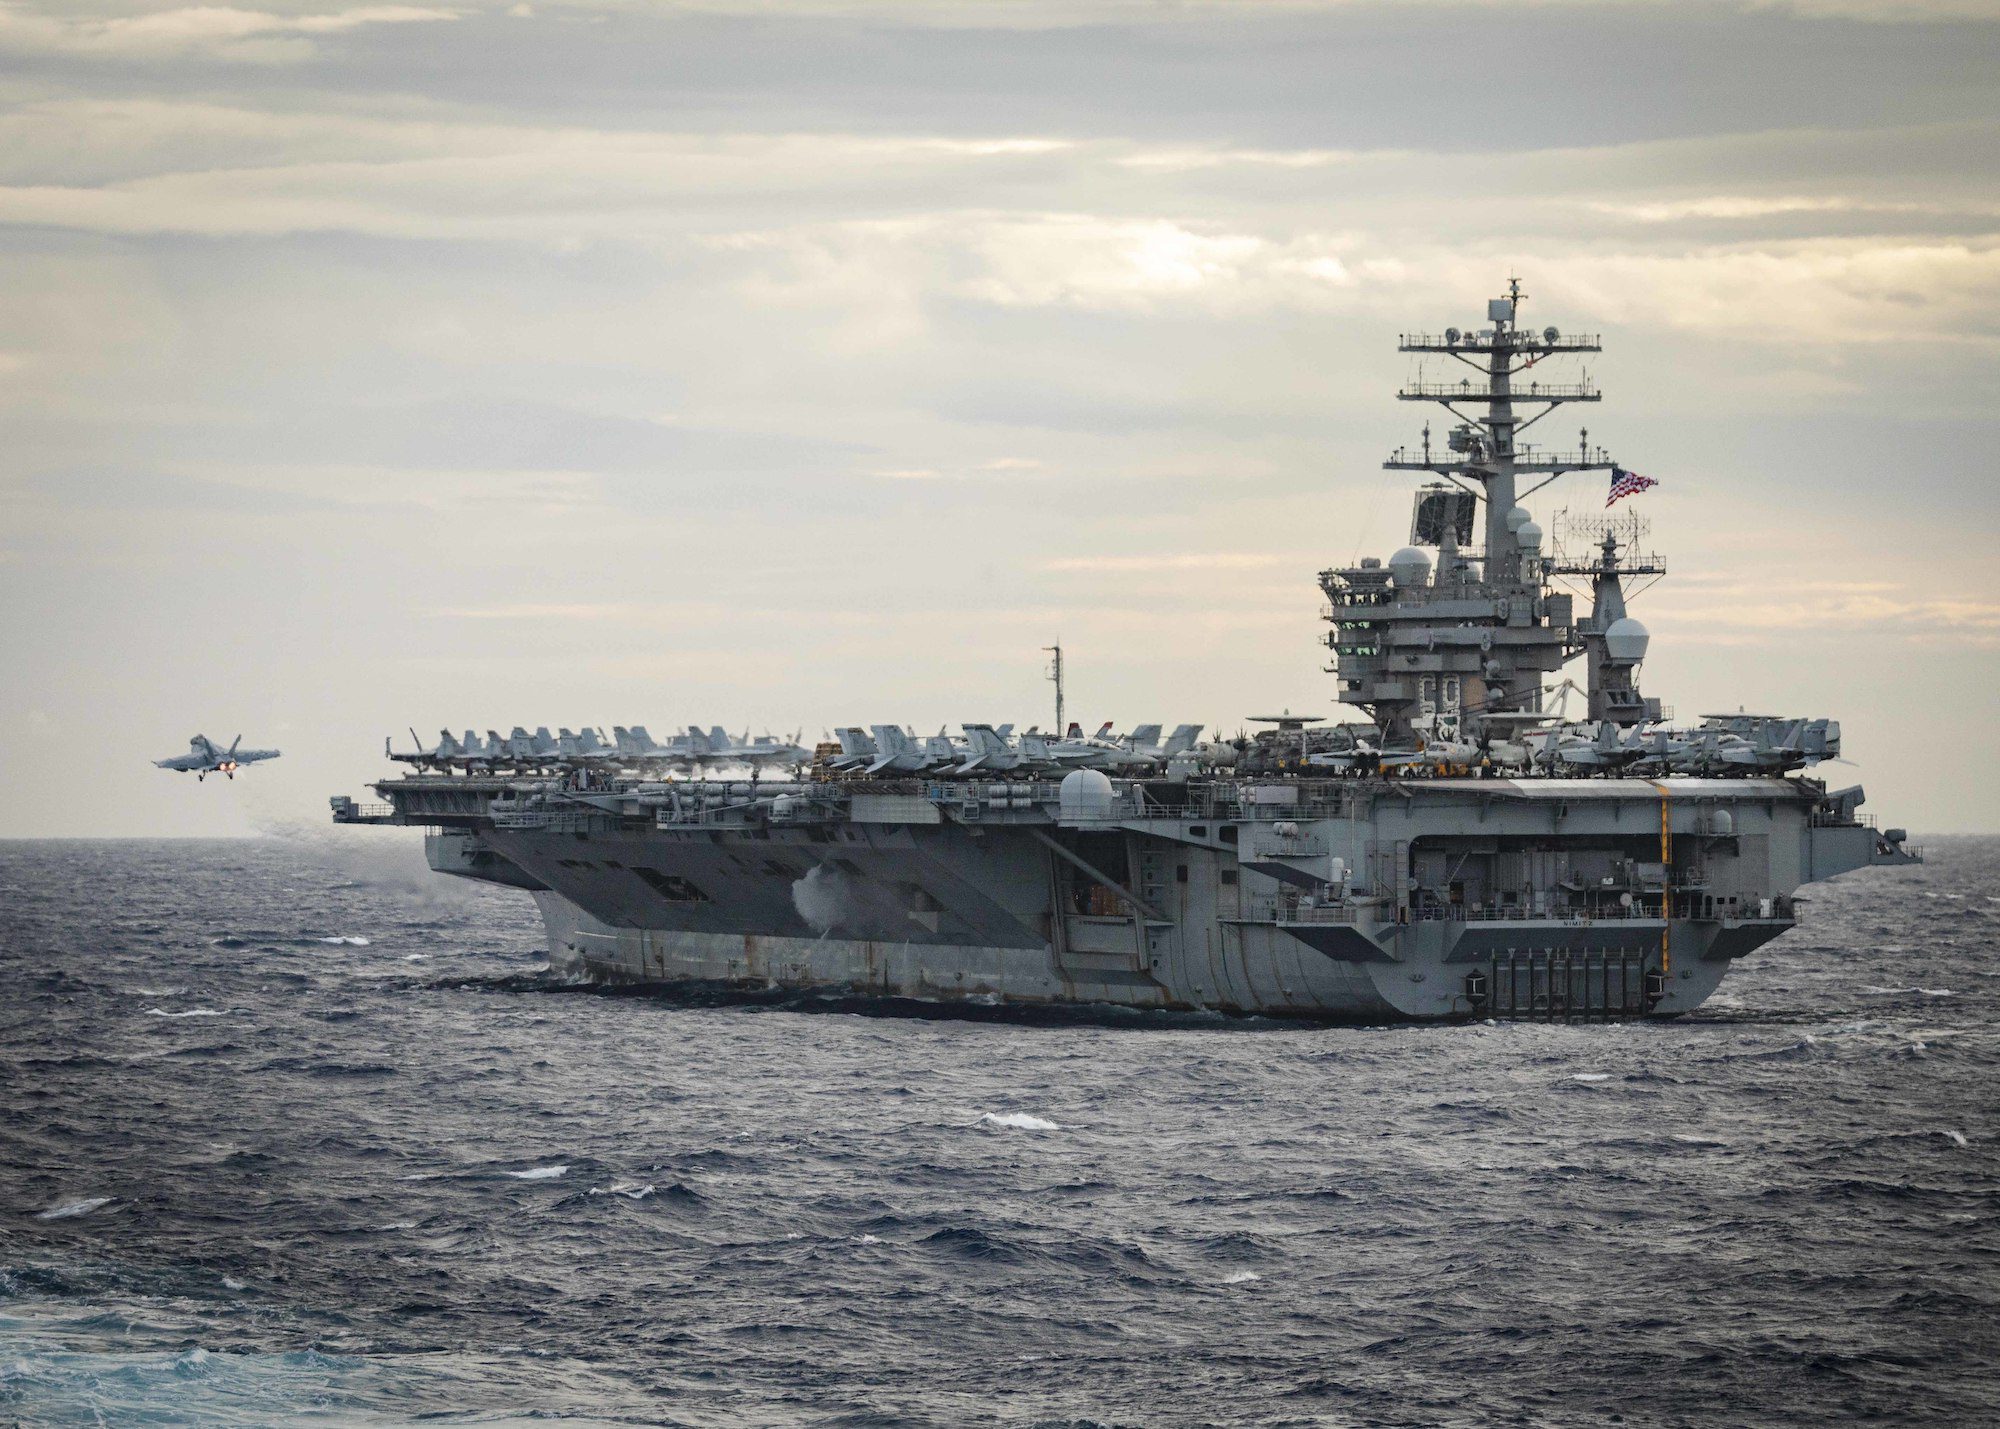 U.S. Aircraft Carriers Conduct Exercise in South China Sea